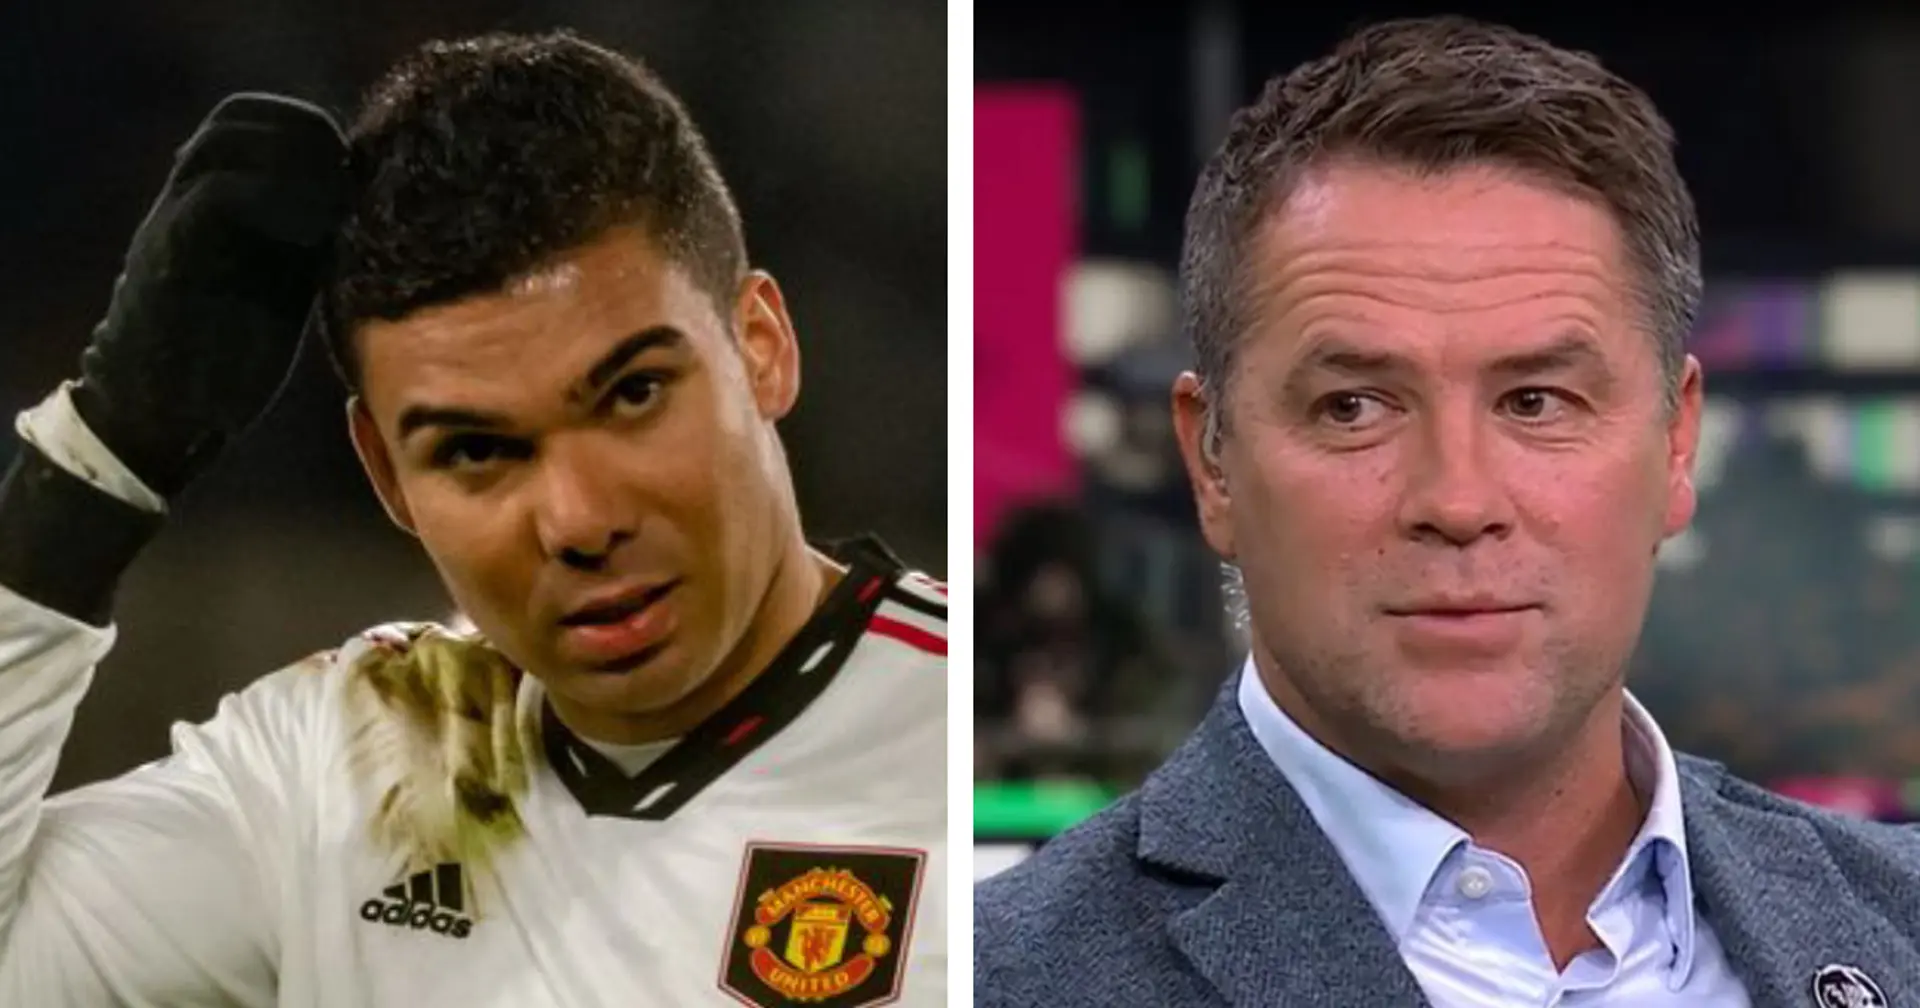 'It wasn't an absolutely last-ditch challenge': Michael Owen questions Casemiro's decision-making vs Palace